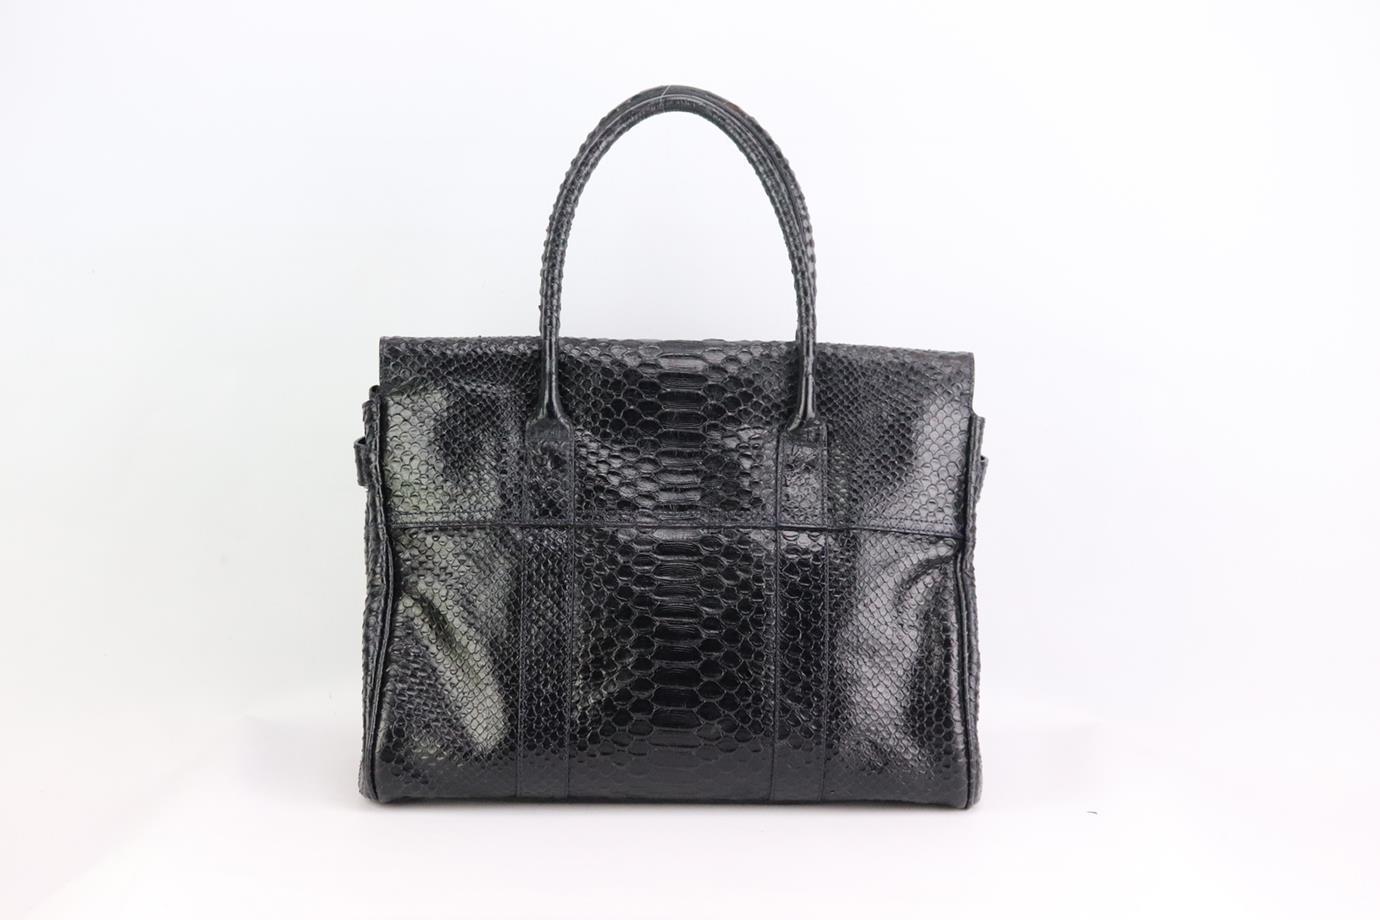 Mulberry The Bayswater python effect leather shoulder bag. Made from black python-effect leather with large interior compartment with zipped pocket. Black. Twist lock fastening at front. Comes with dustbag. Height: 11 in. Width: 14.5 in. Depth: 6